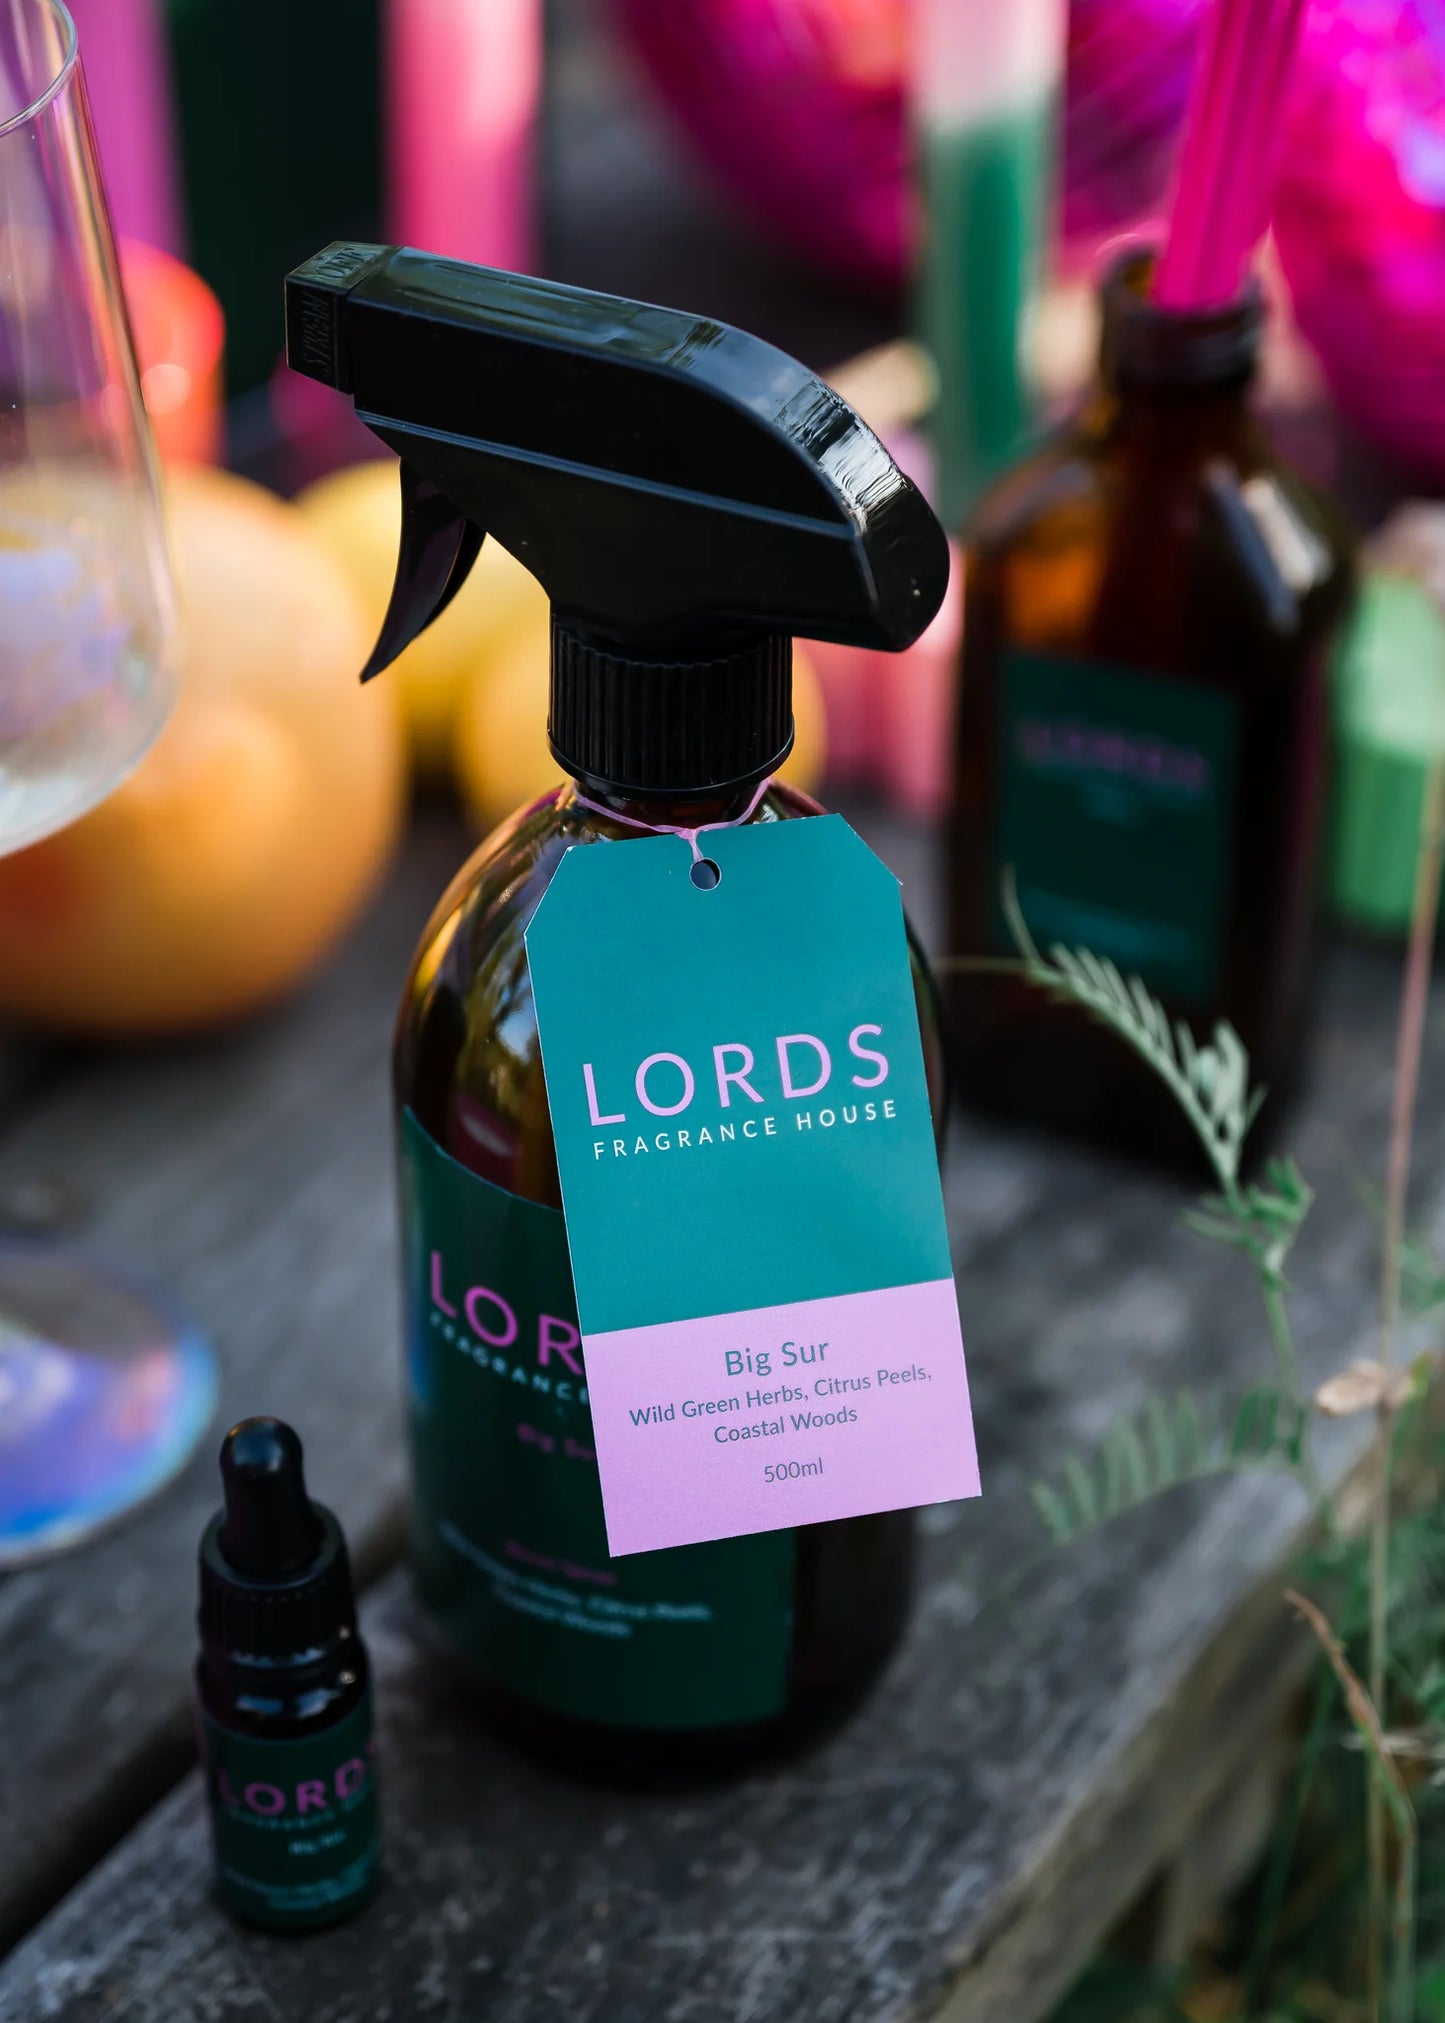 Lords Fragrance House Room Spray 500ml - Various Scents